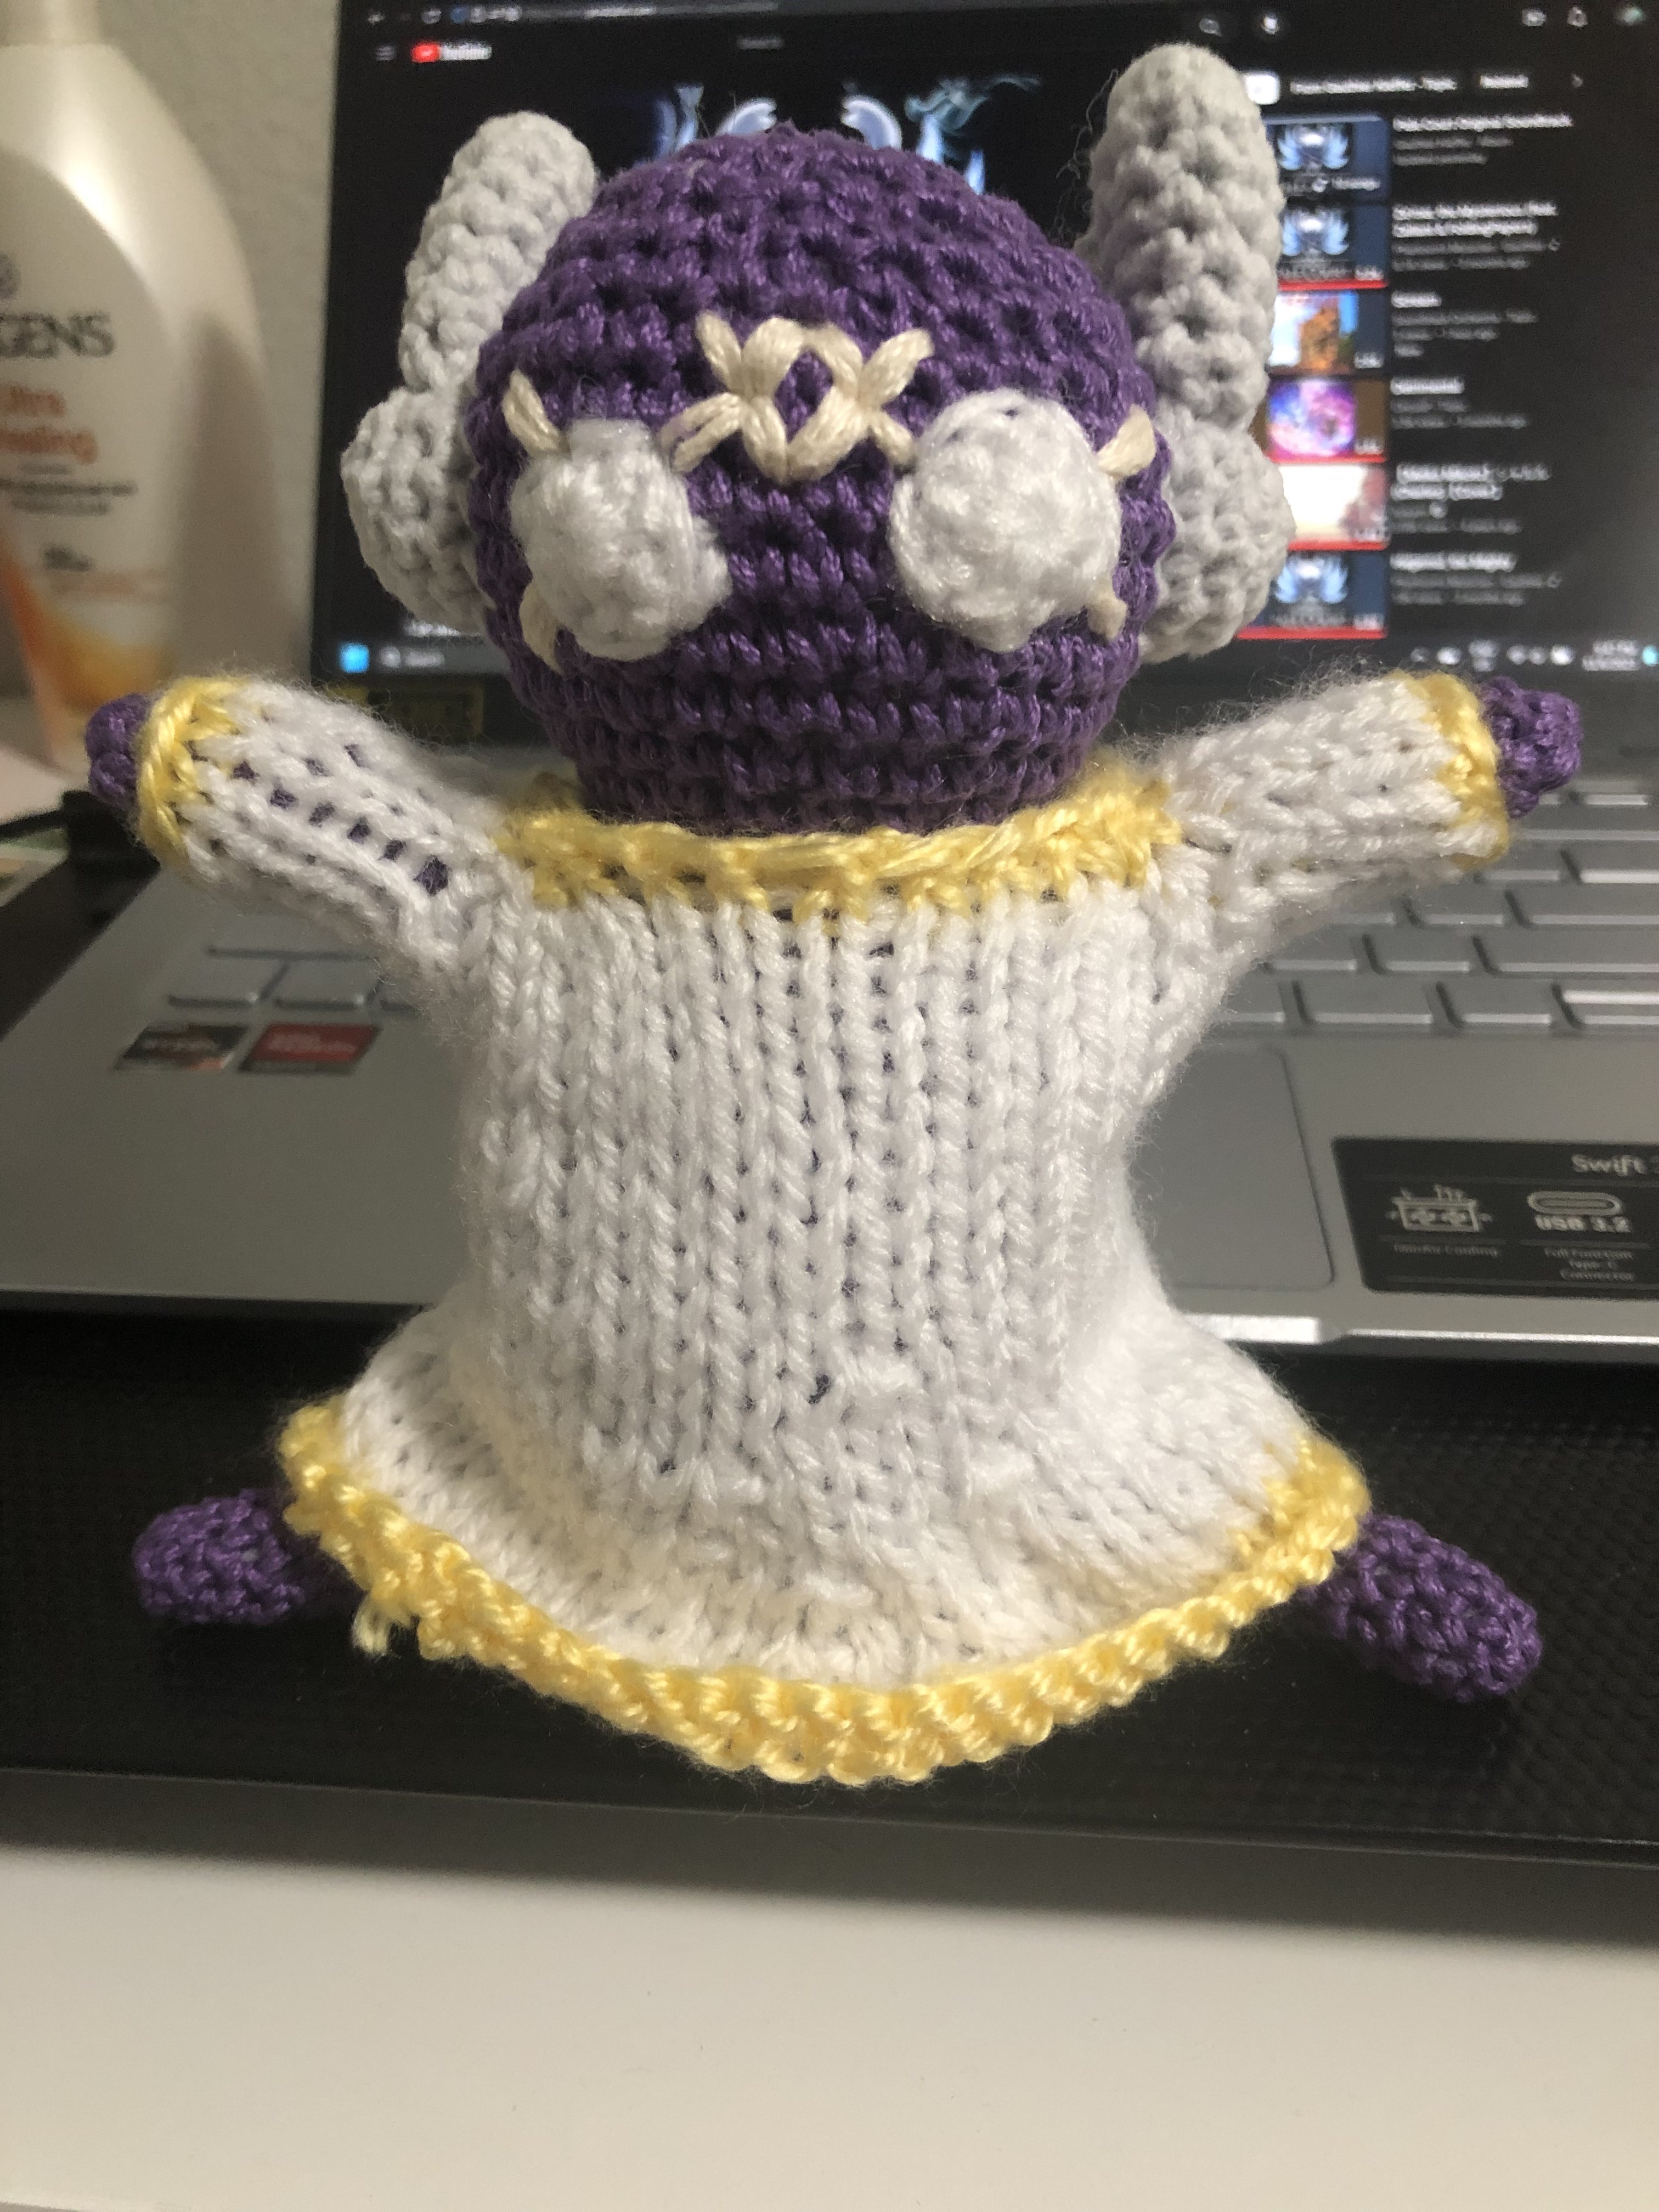 My crocheted doll of Unparalleled Innocence. They're purple and have white eyes. They have two cream markings radiating outwards from each of their eyes, and a small cream diamond shaped marking on their forehead that has similar radiating markings on the two horizontal corners. Their cloak is white with yellow hems. Their antennae are lobe shaped.